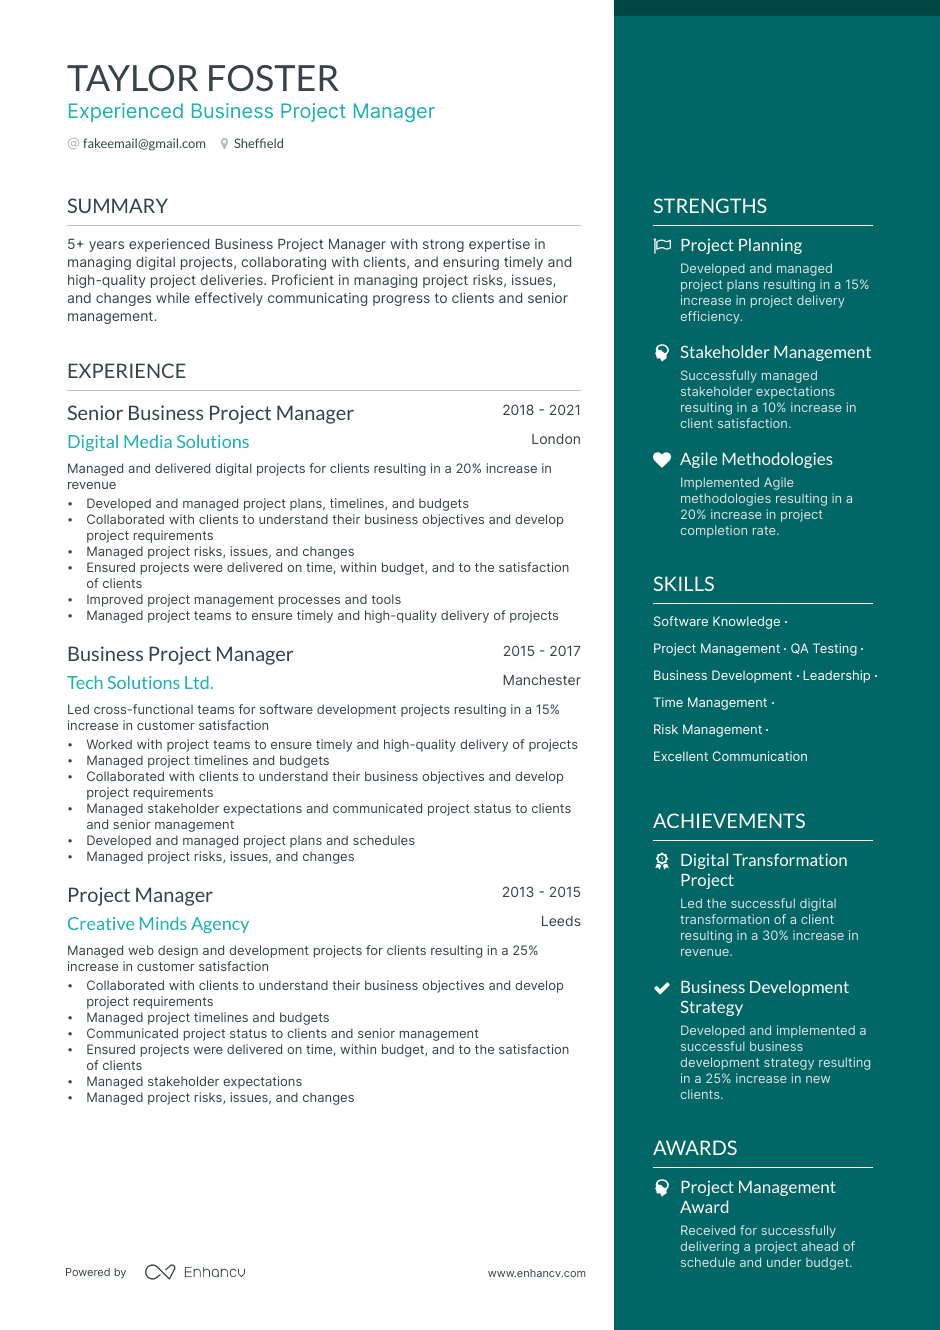 Business Project Manager resume example